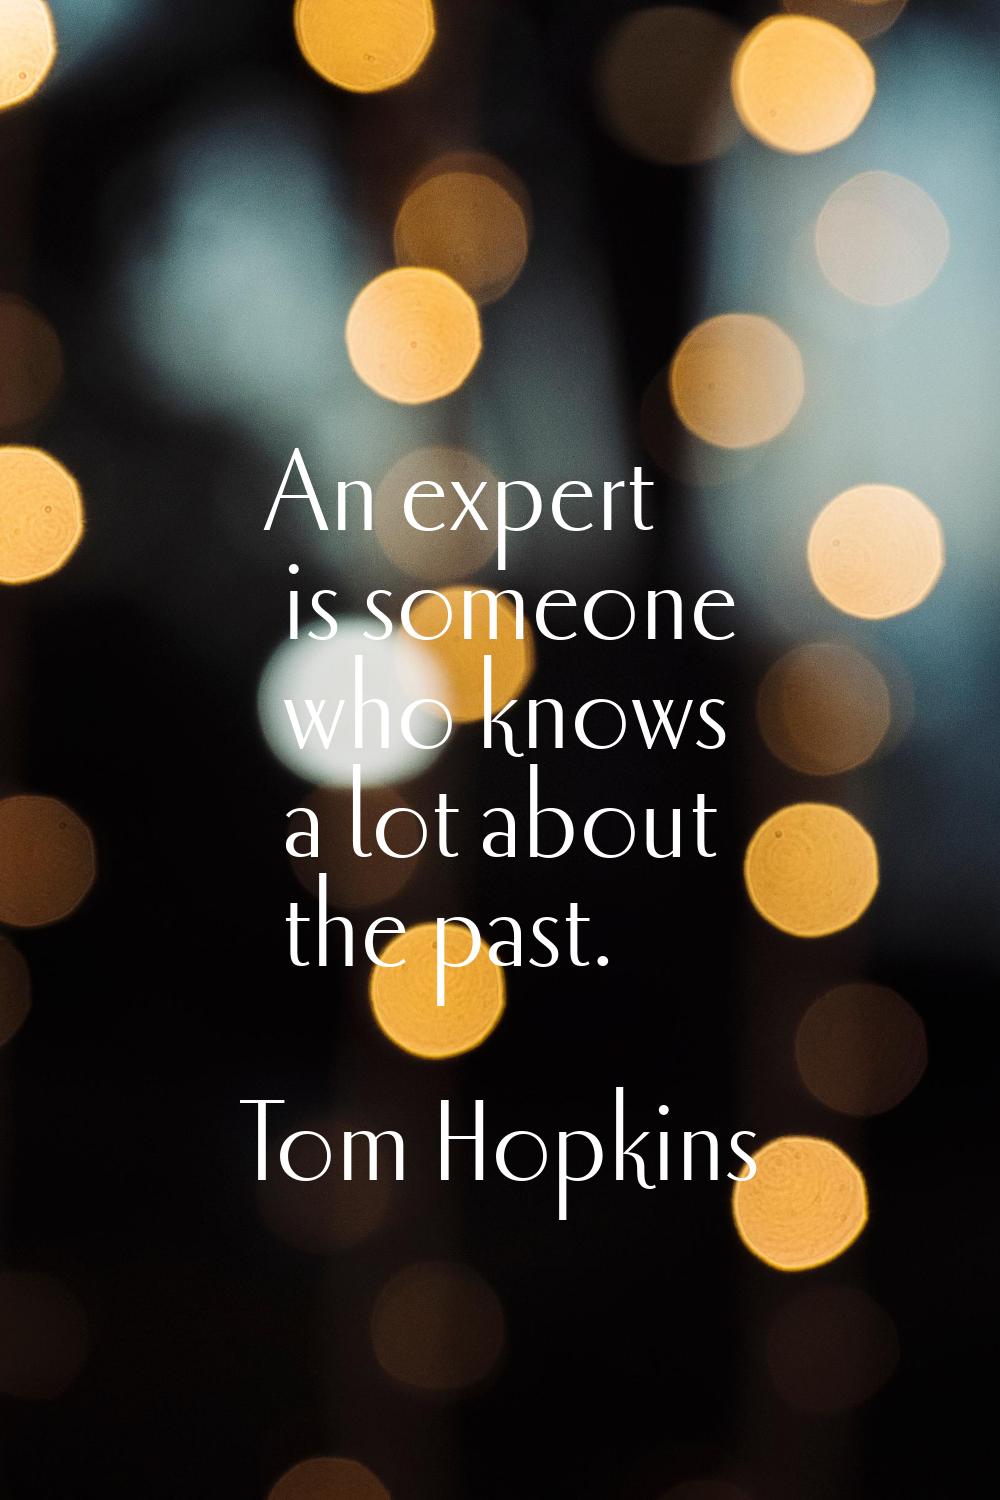 An expert is someone who knows a lot about the past.